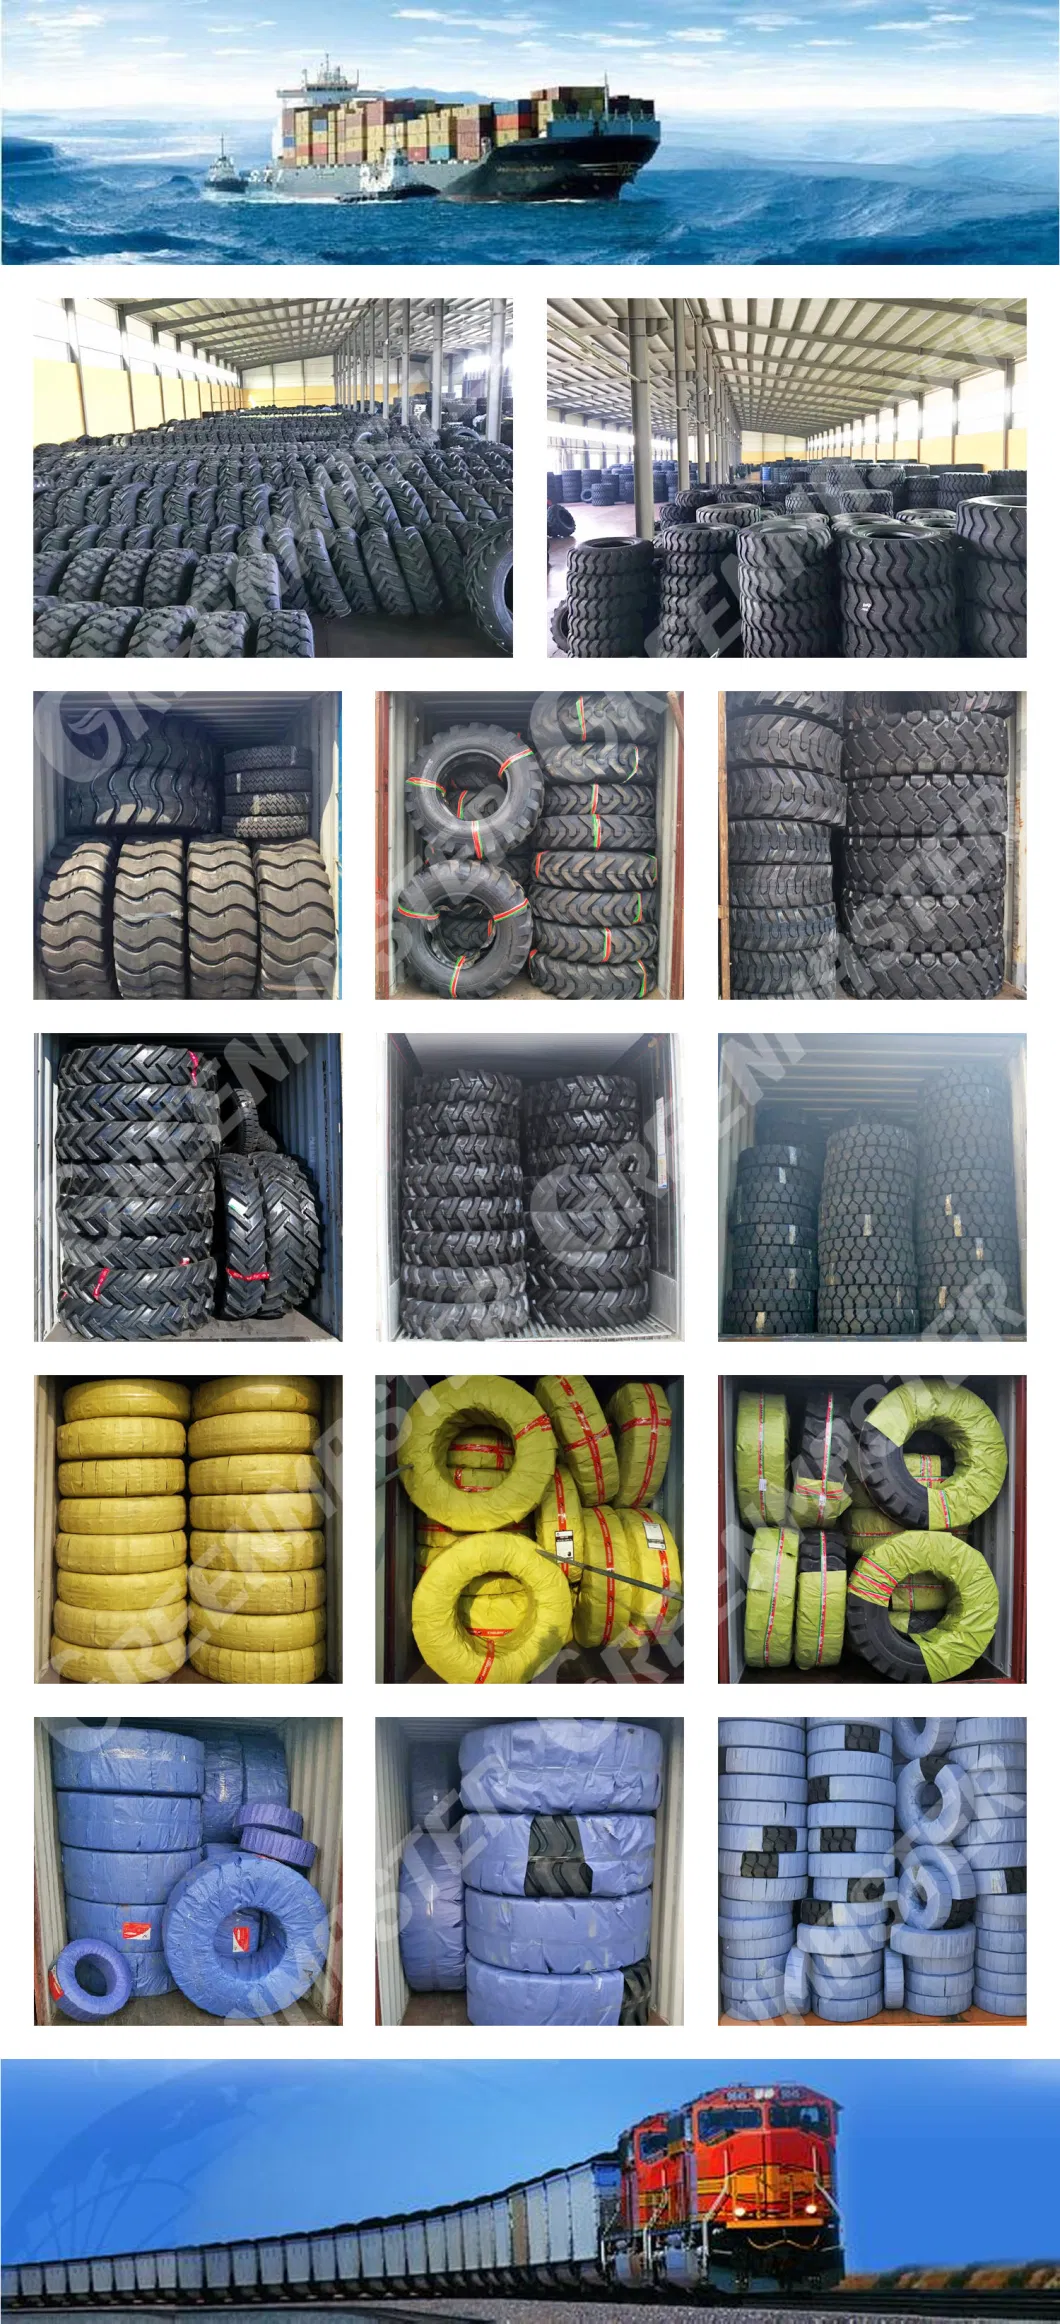 R1 Lug F2 Imp I1 R2 Pattern Agriculture Tractor Tyre, Mini Turf Tractor Tire, Farming Implement Baler Trailer Cart Tyre 4.00-16 4.50-16 5.00-16 5.50-16 6.00-16